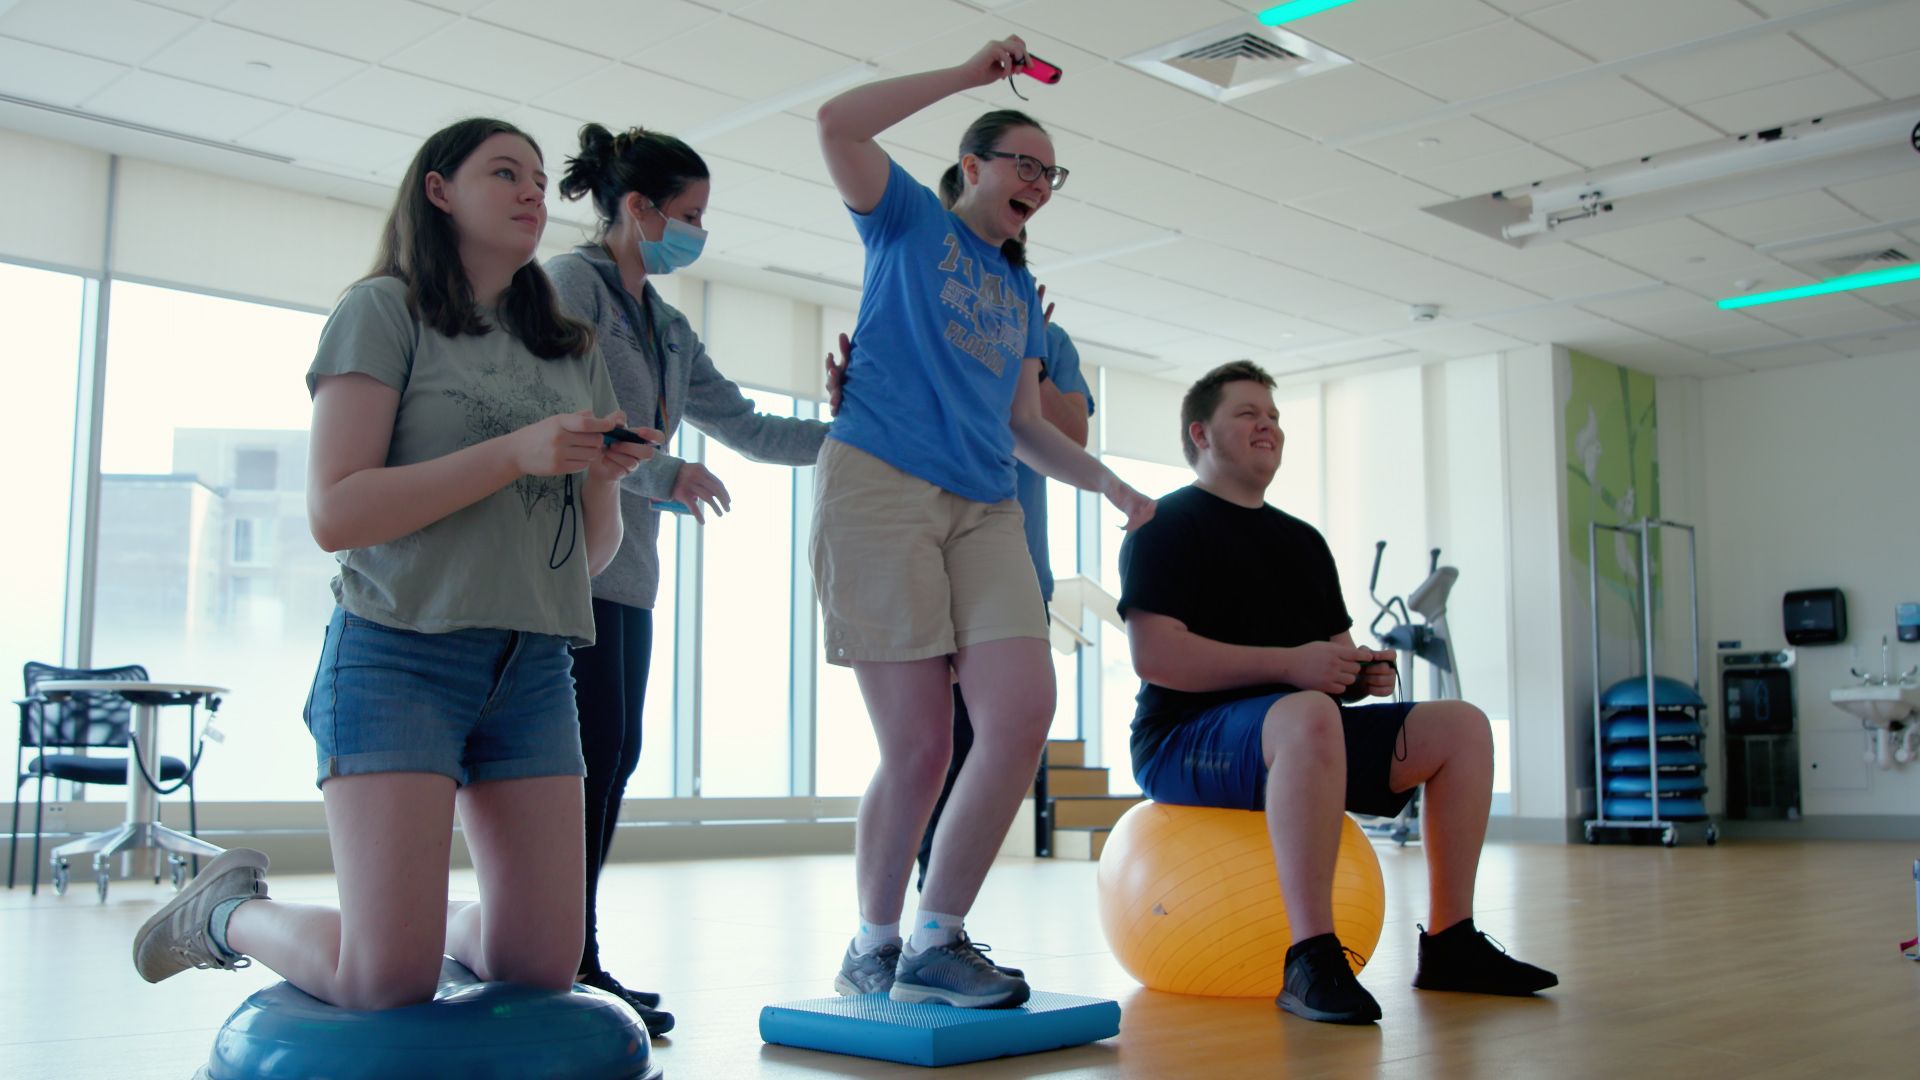 Patients go through various exercises at the Young Adult Pain Rehabilitation Center (YAPRC).